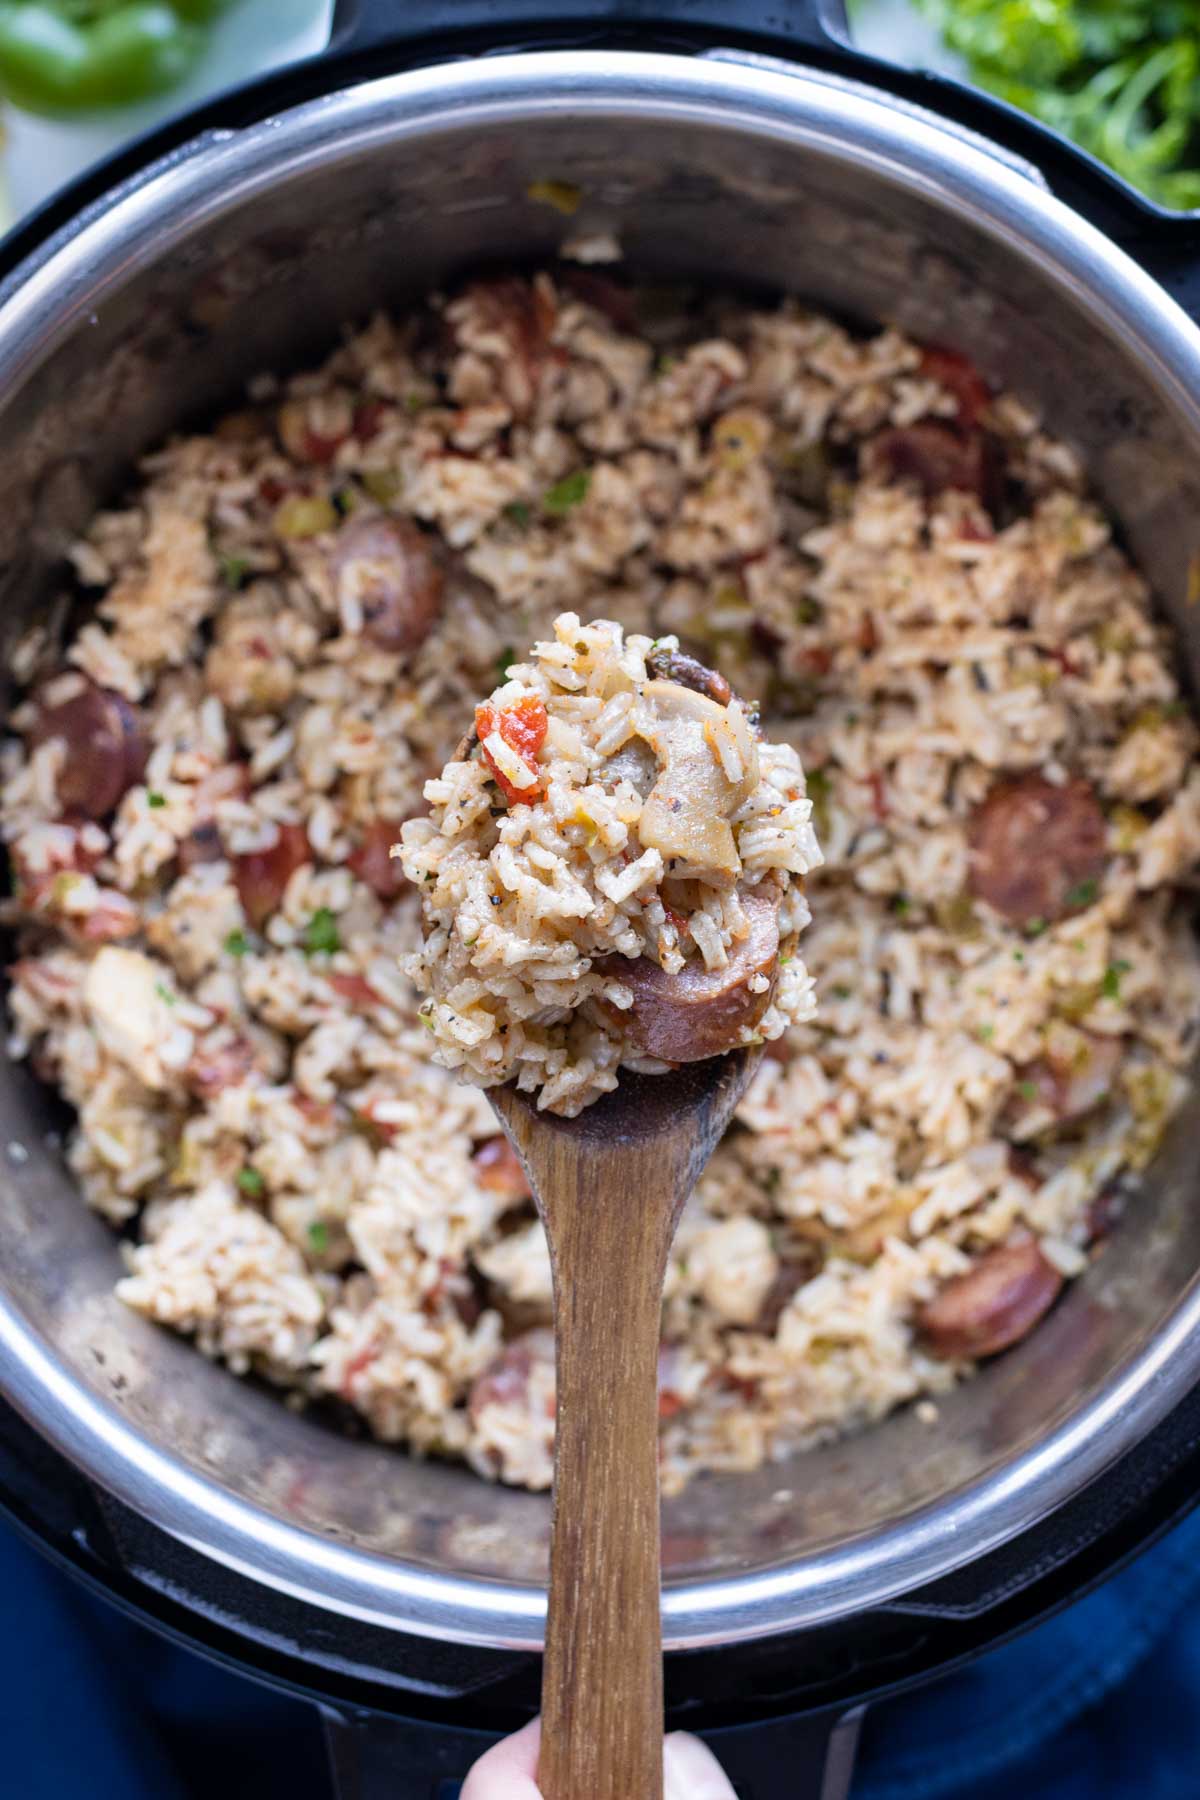 A wooden spoon is used to scoop out the jambalaya.